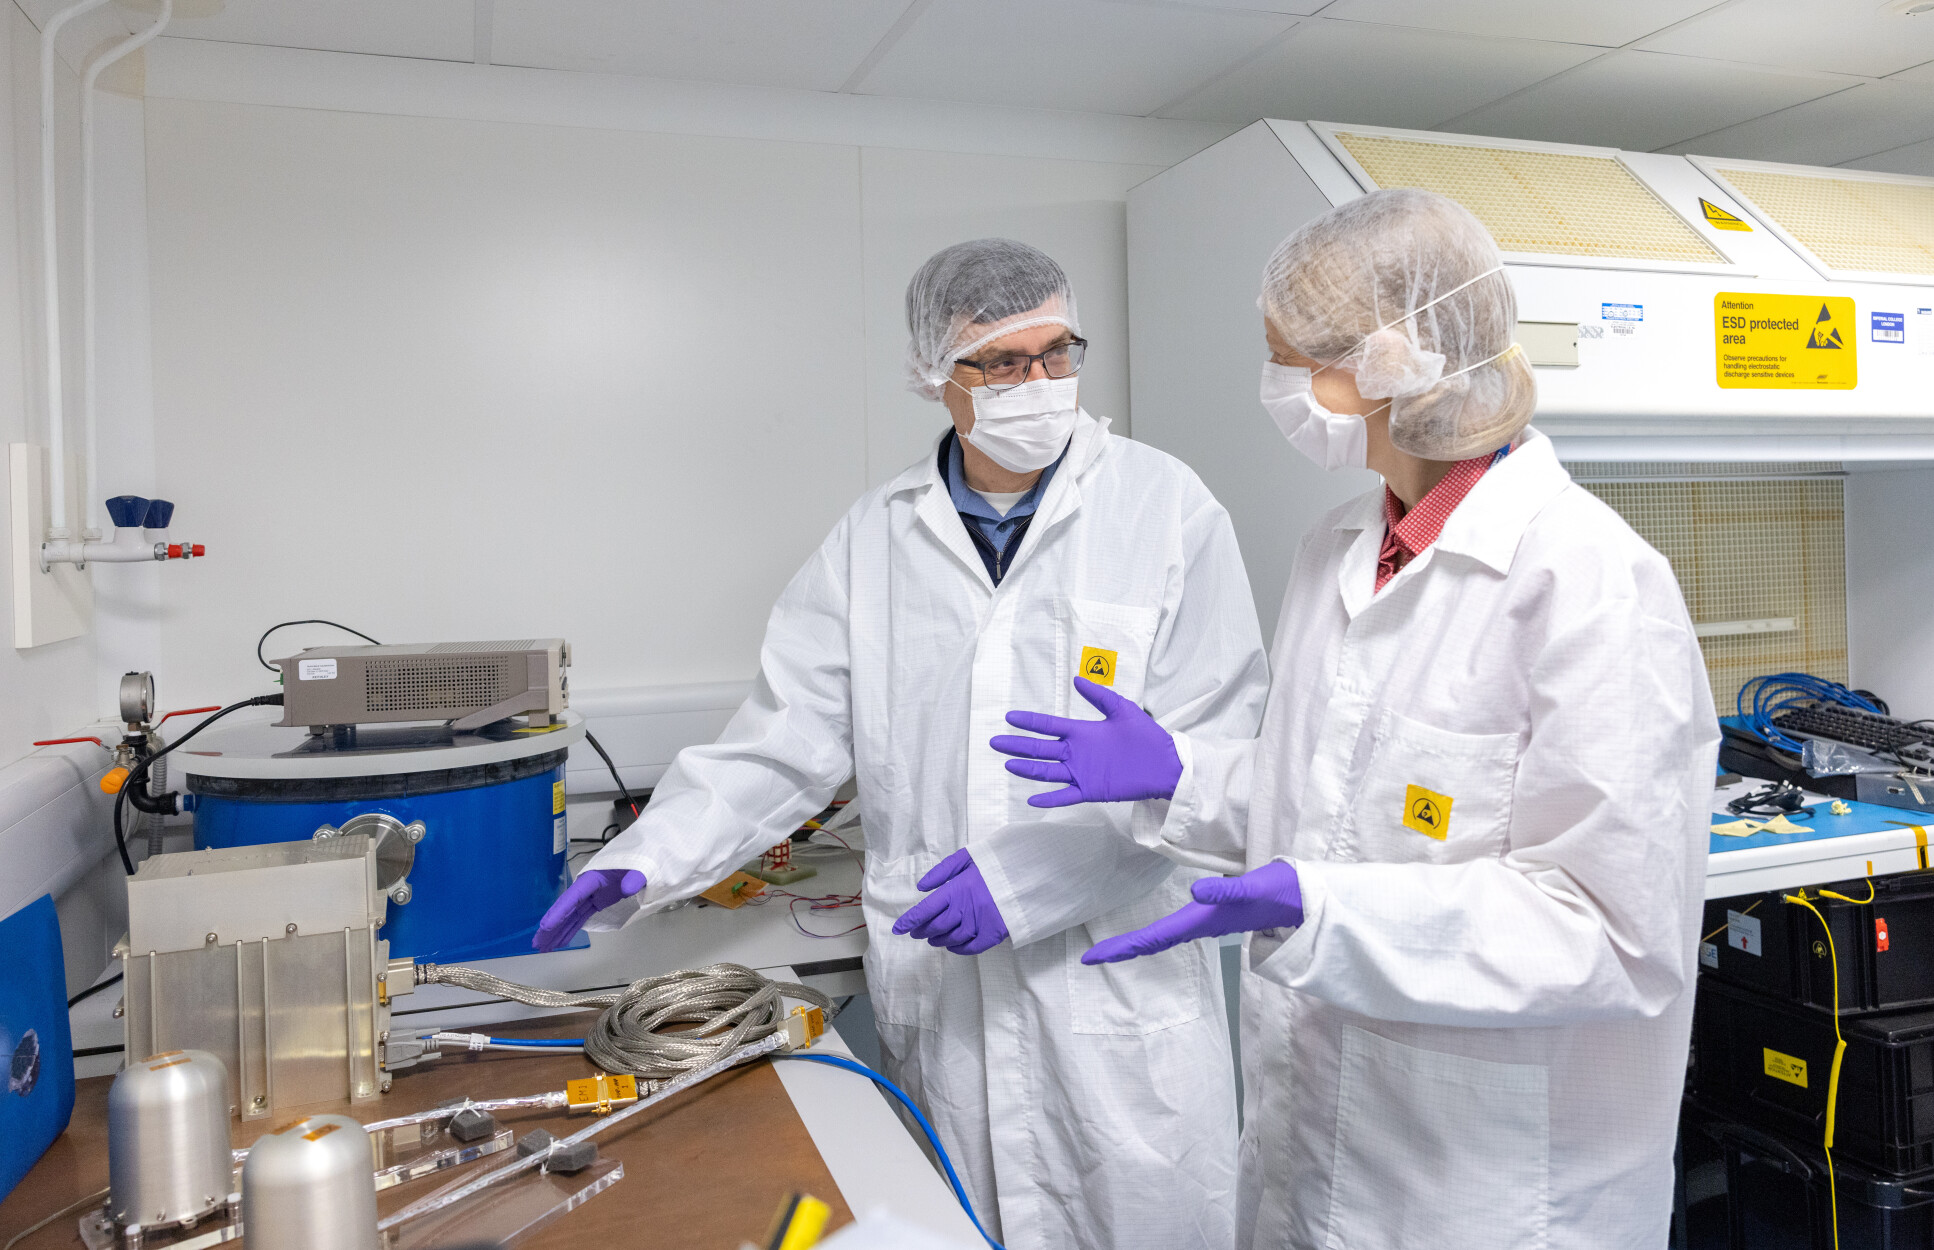 Two people in lab coats, gloves, masks and hirnets gesturing at equipment on a table